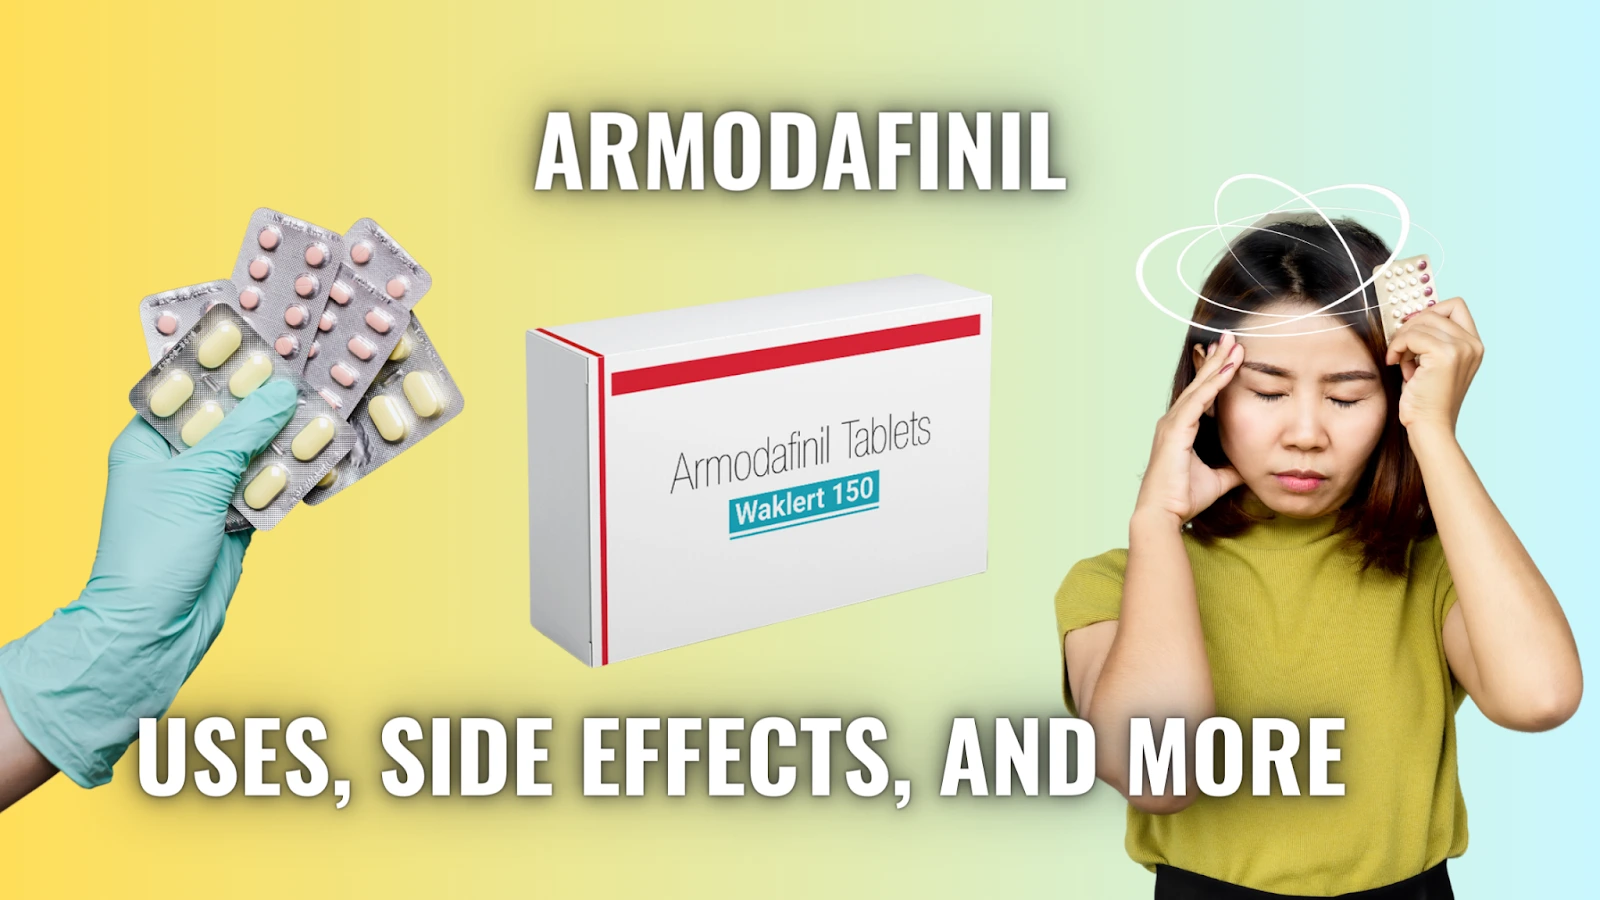 Armodafinil - Uses, Side Effects, And More